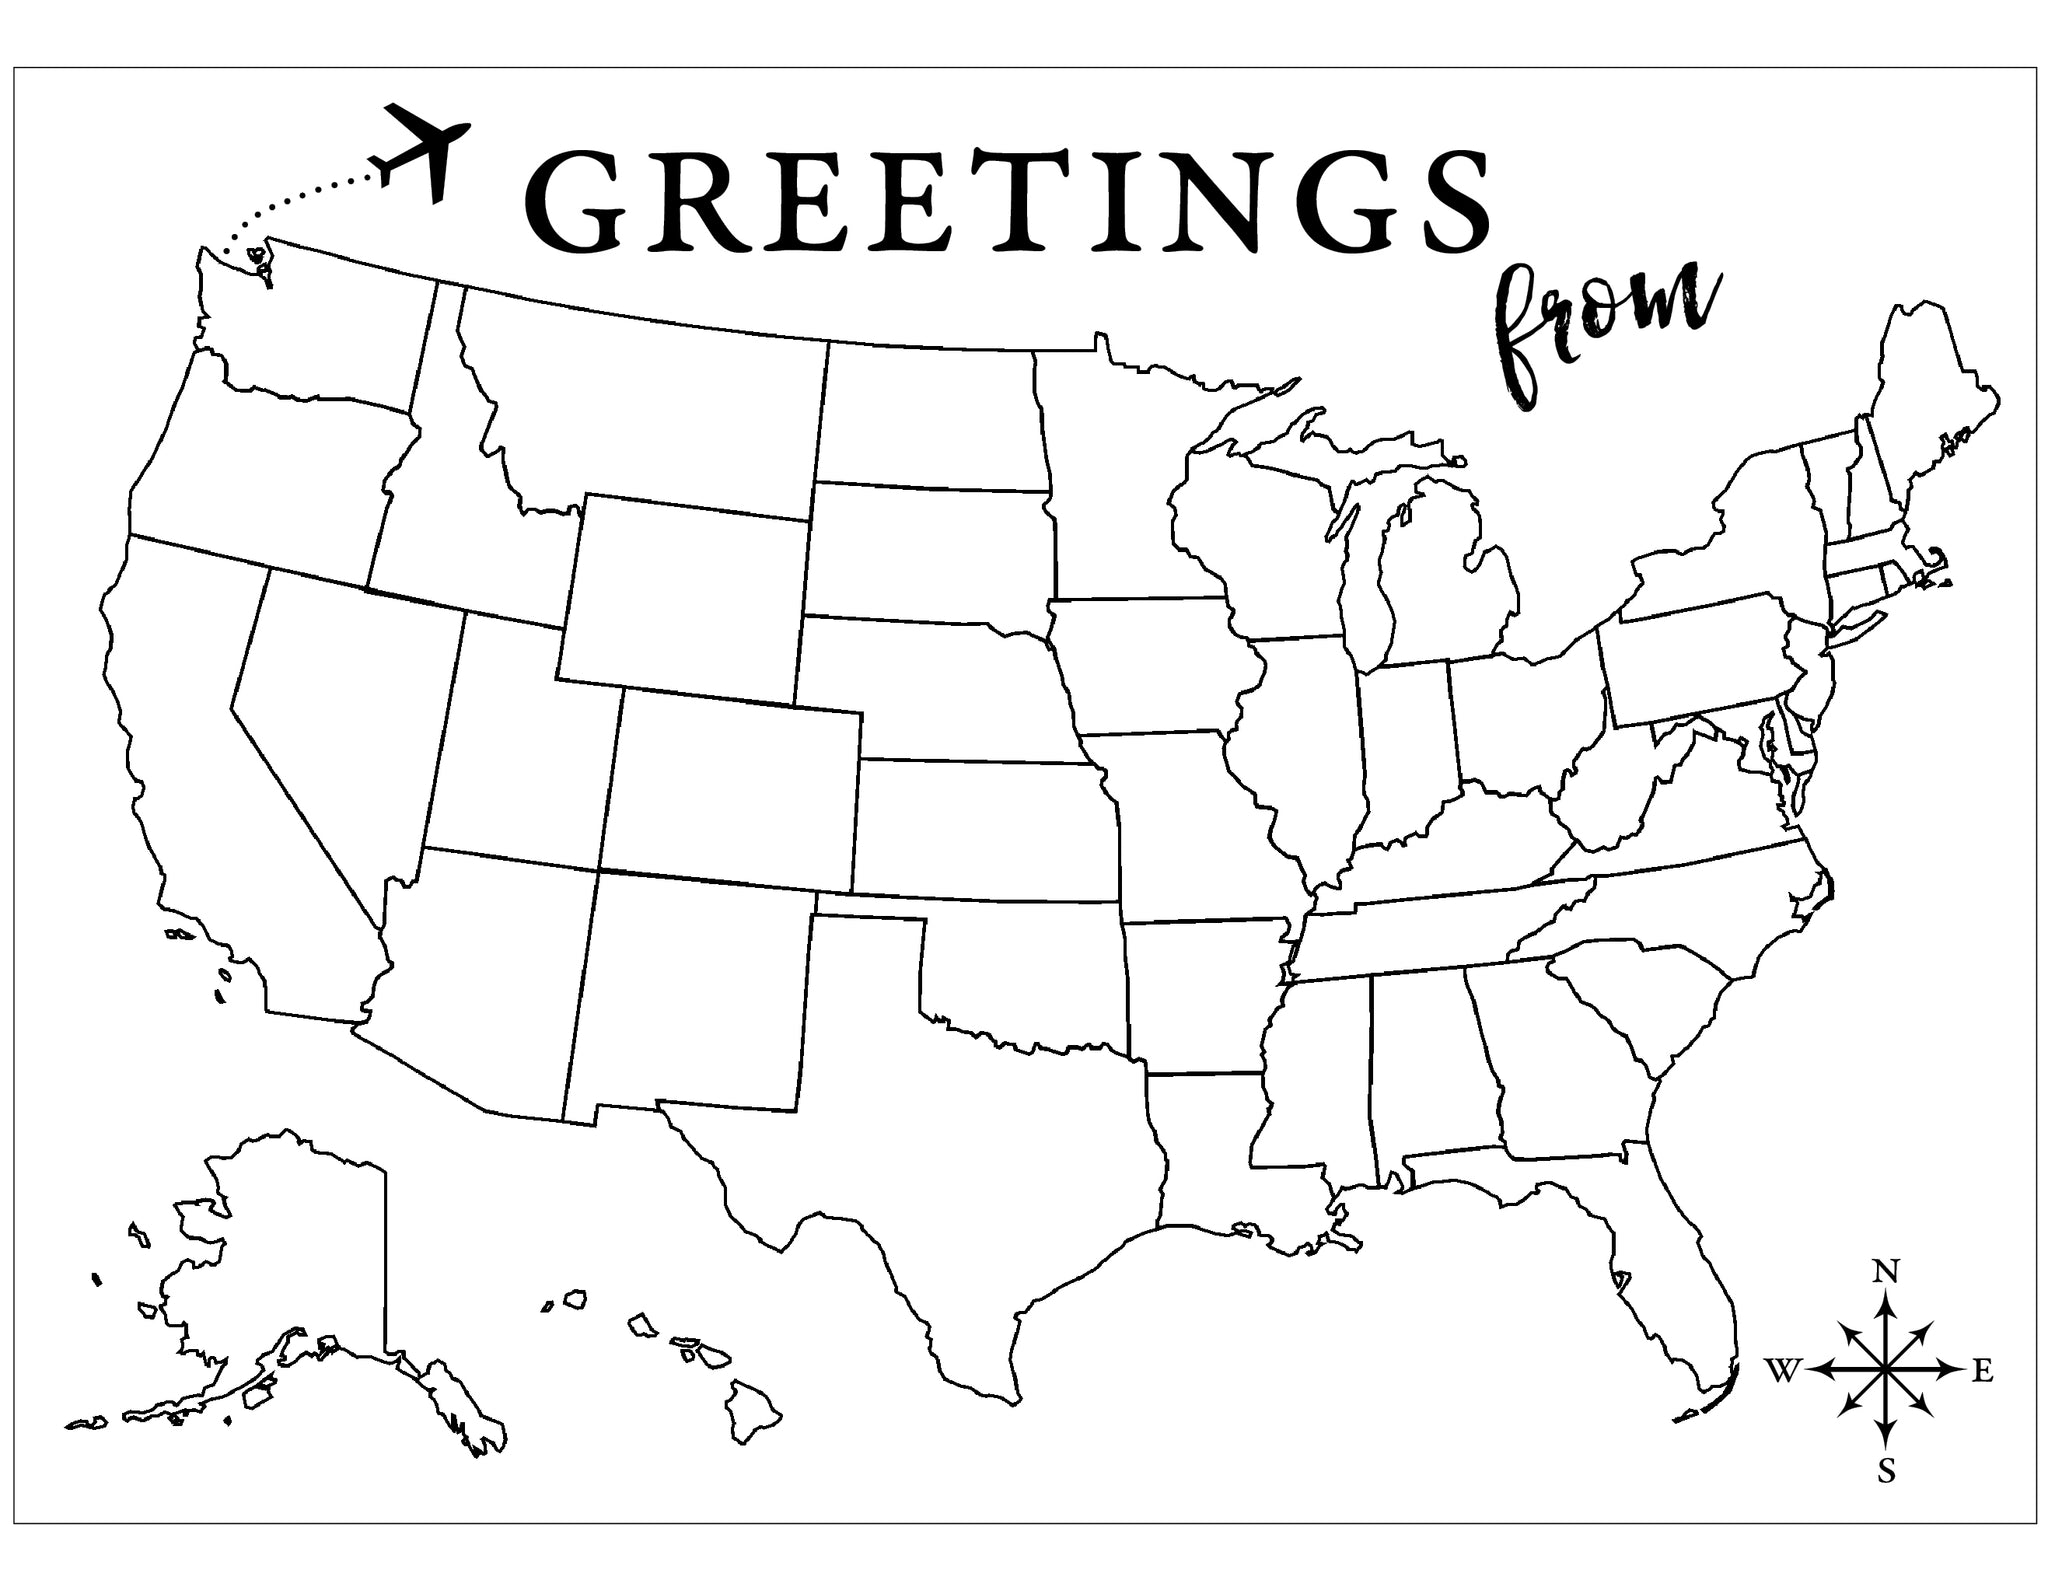 Greetings From... Mark the Map Postcards - Pack of 10